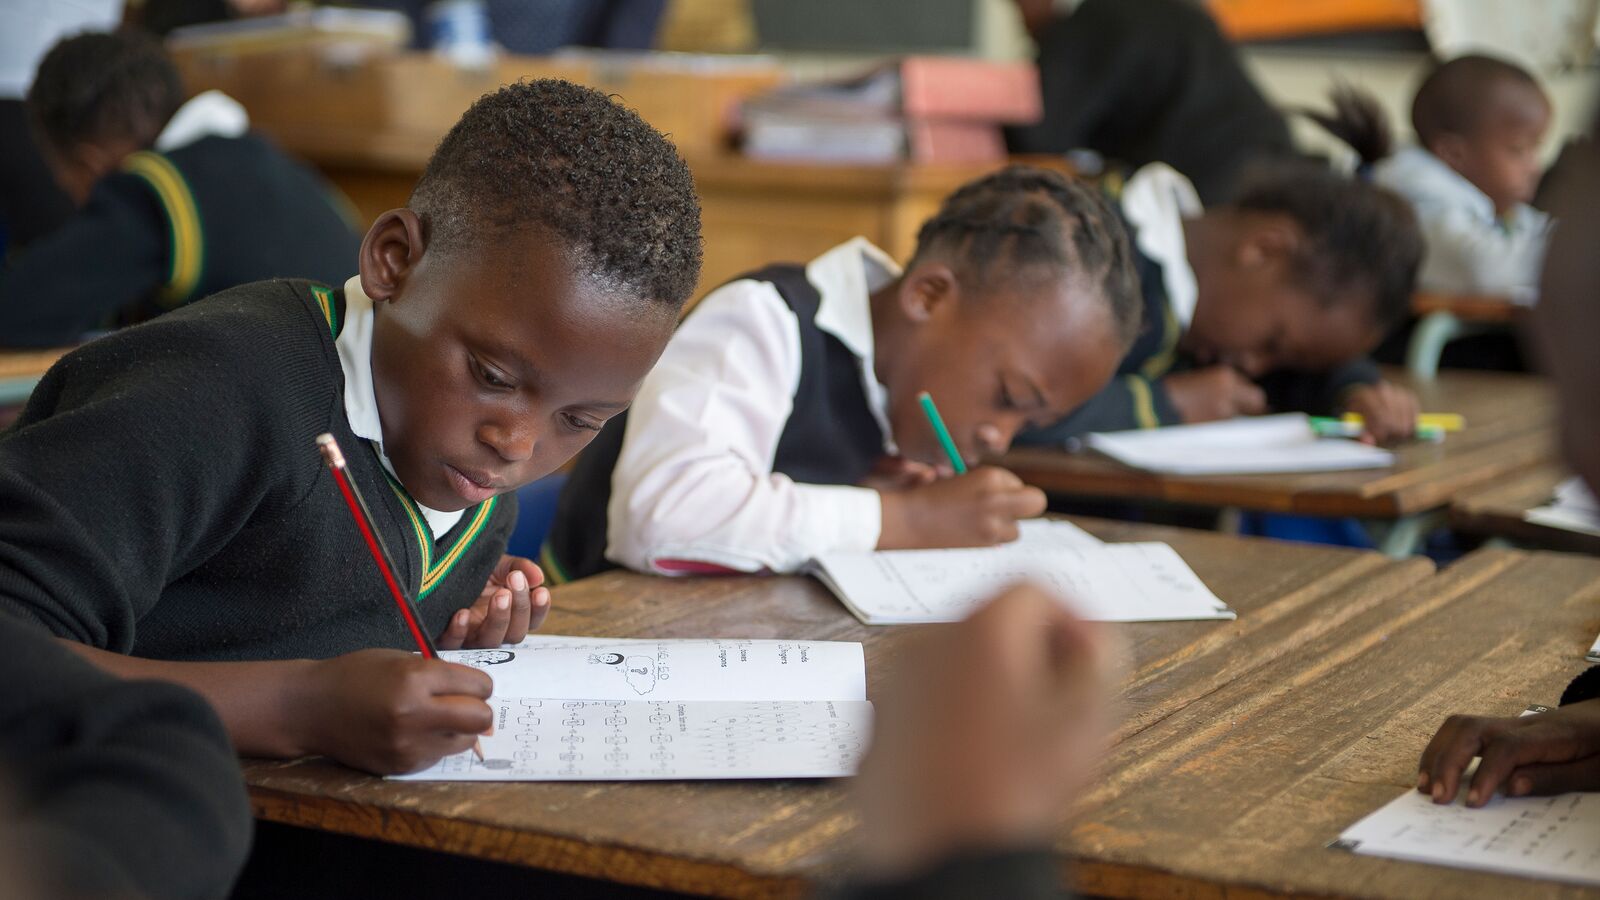 jumpstart-improves-math-learning-for-children-in-south-africa